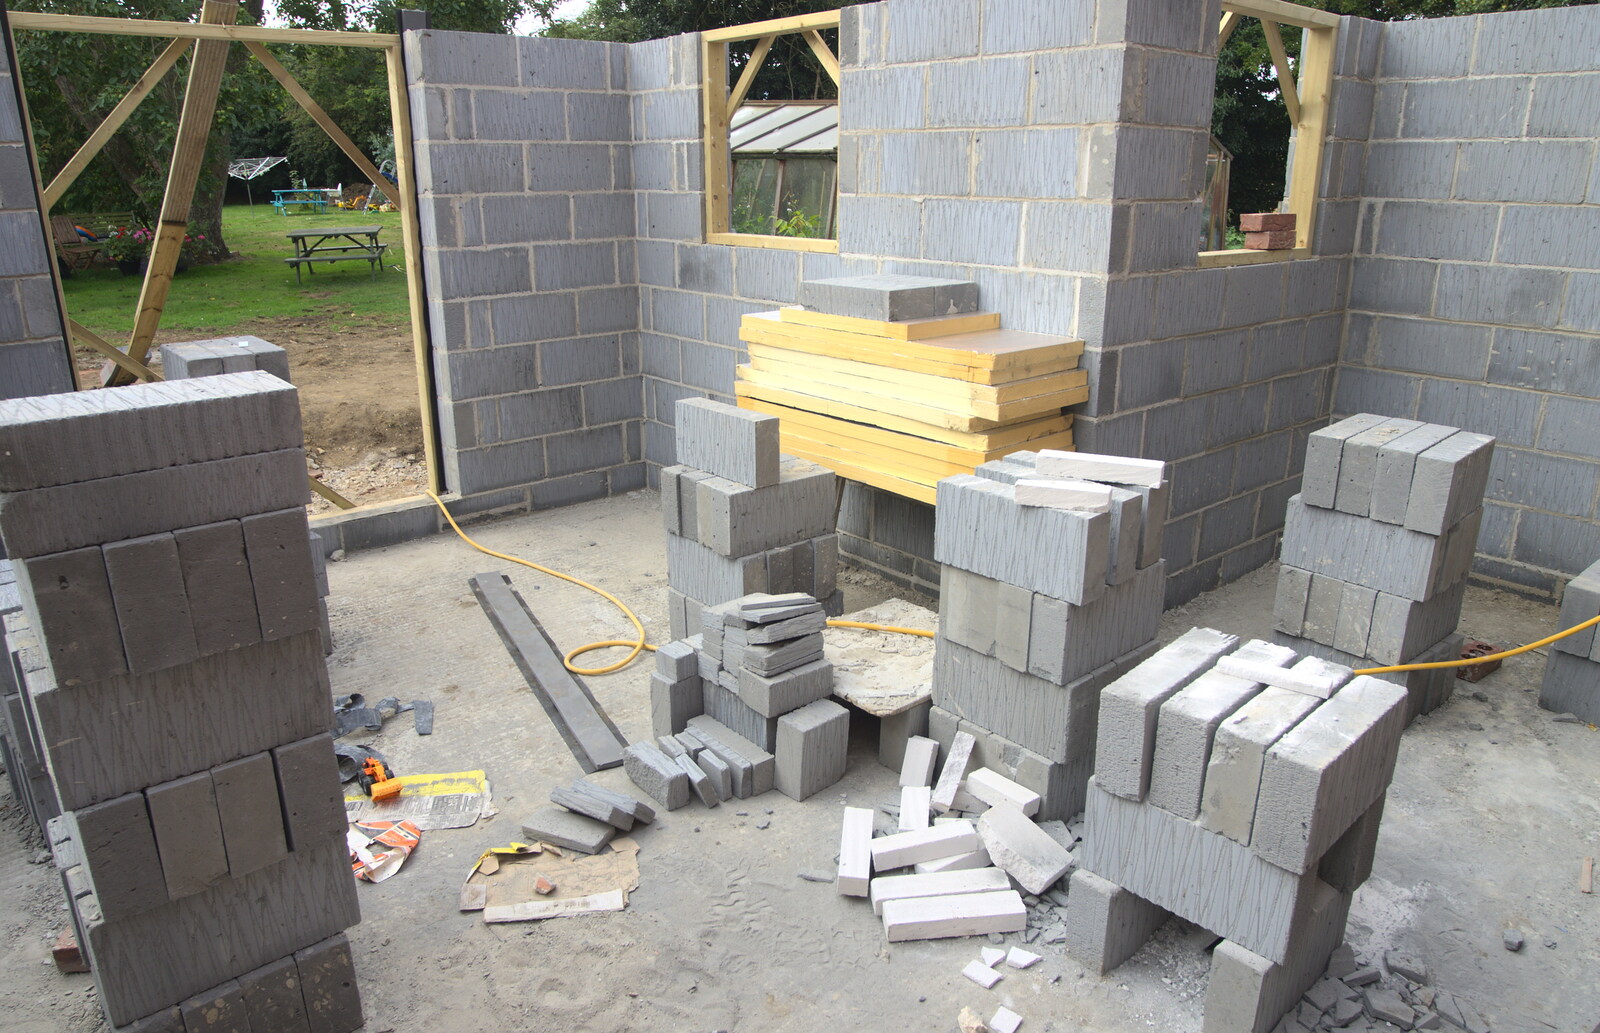 The back room is coming along nicely from Bressingham Gardens, and Building Progress, Brome, Suffolk - 26th August 2013